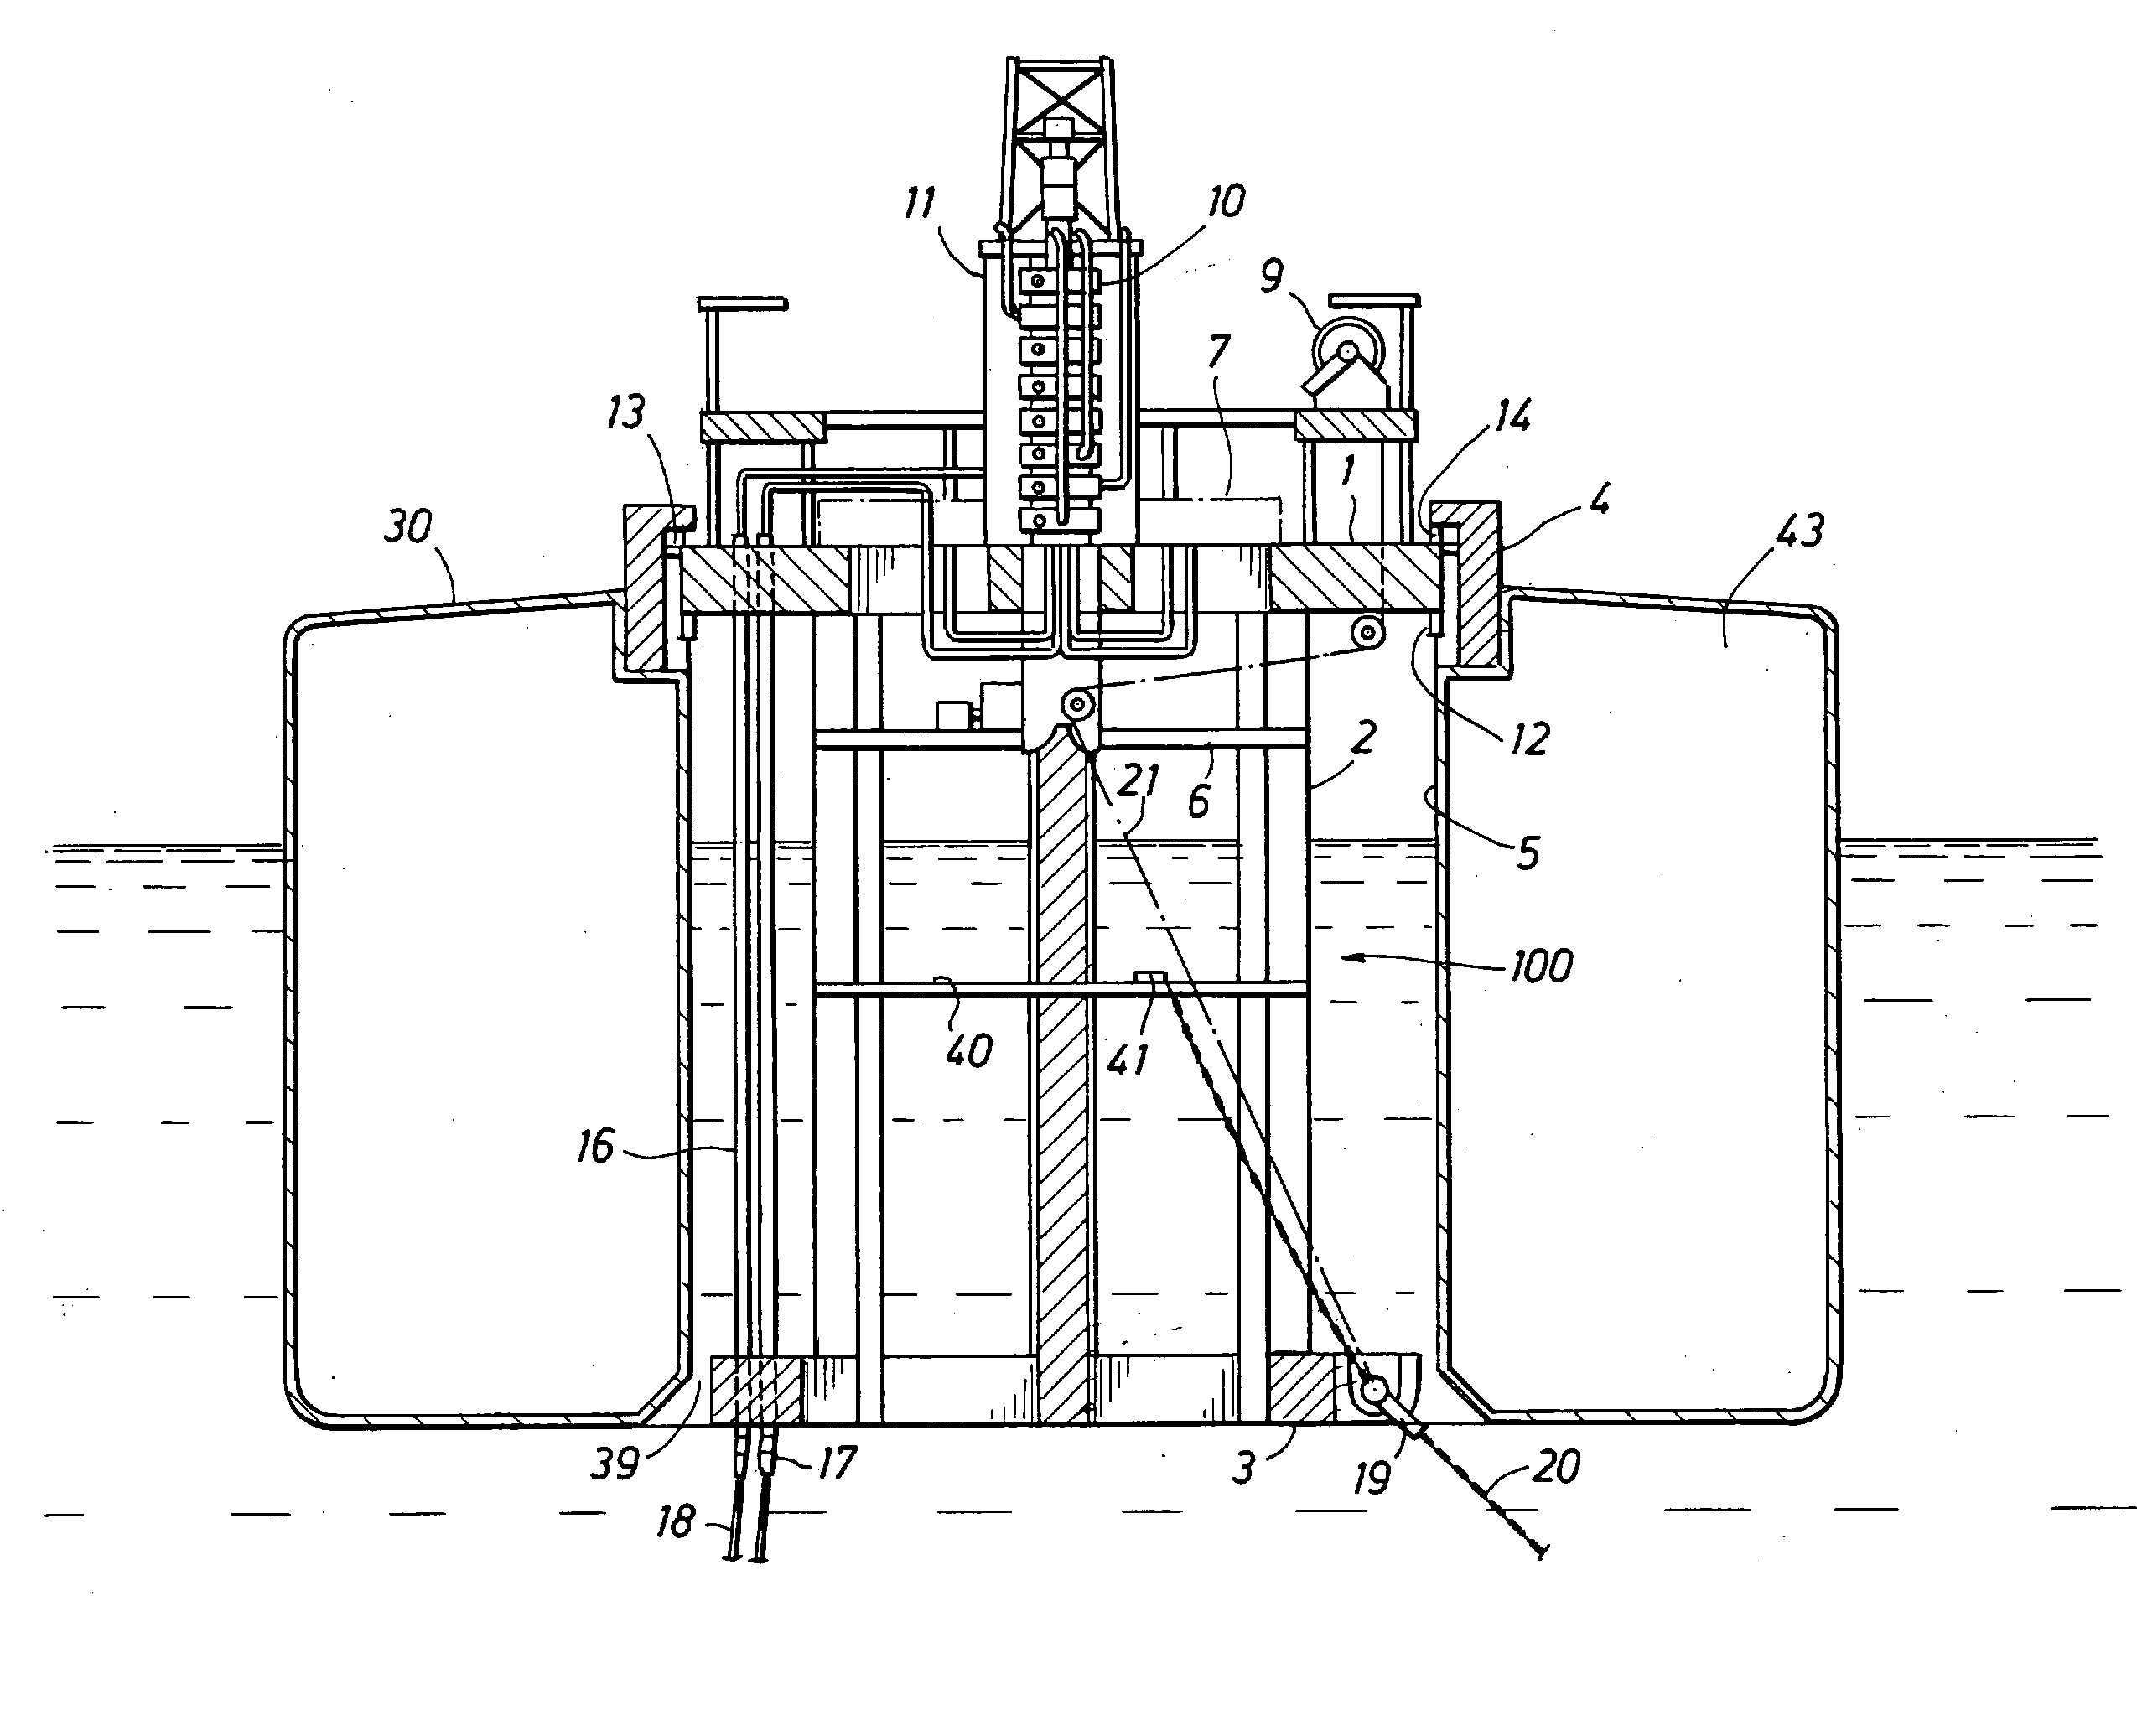 Large diameter mooring turret with compliant deck and frame